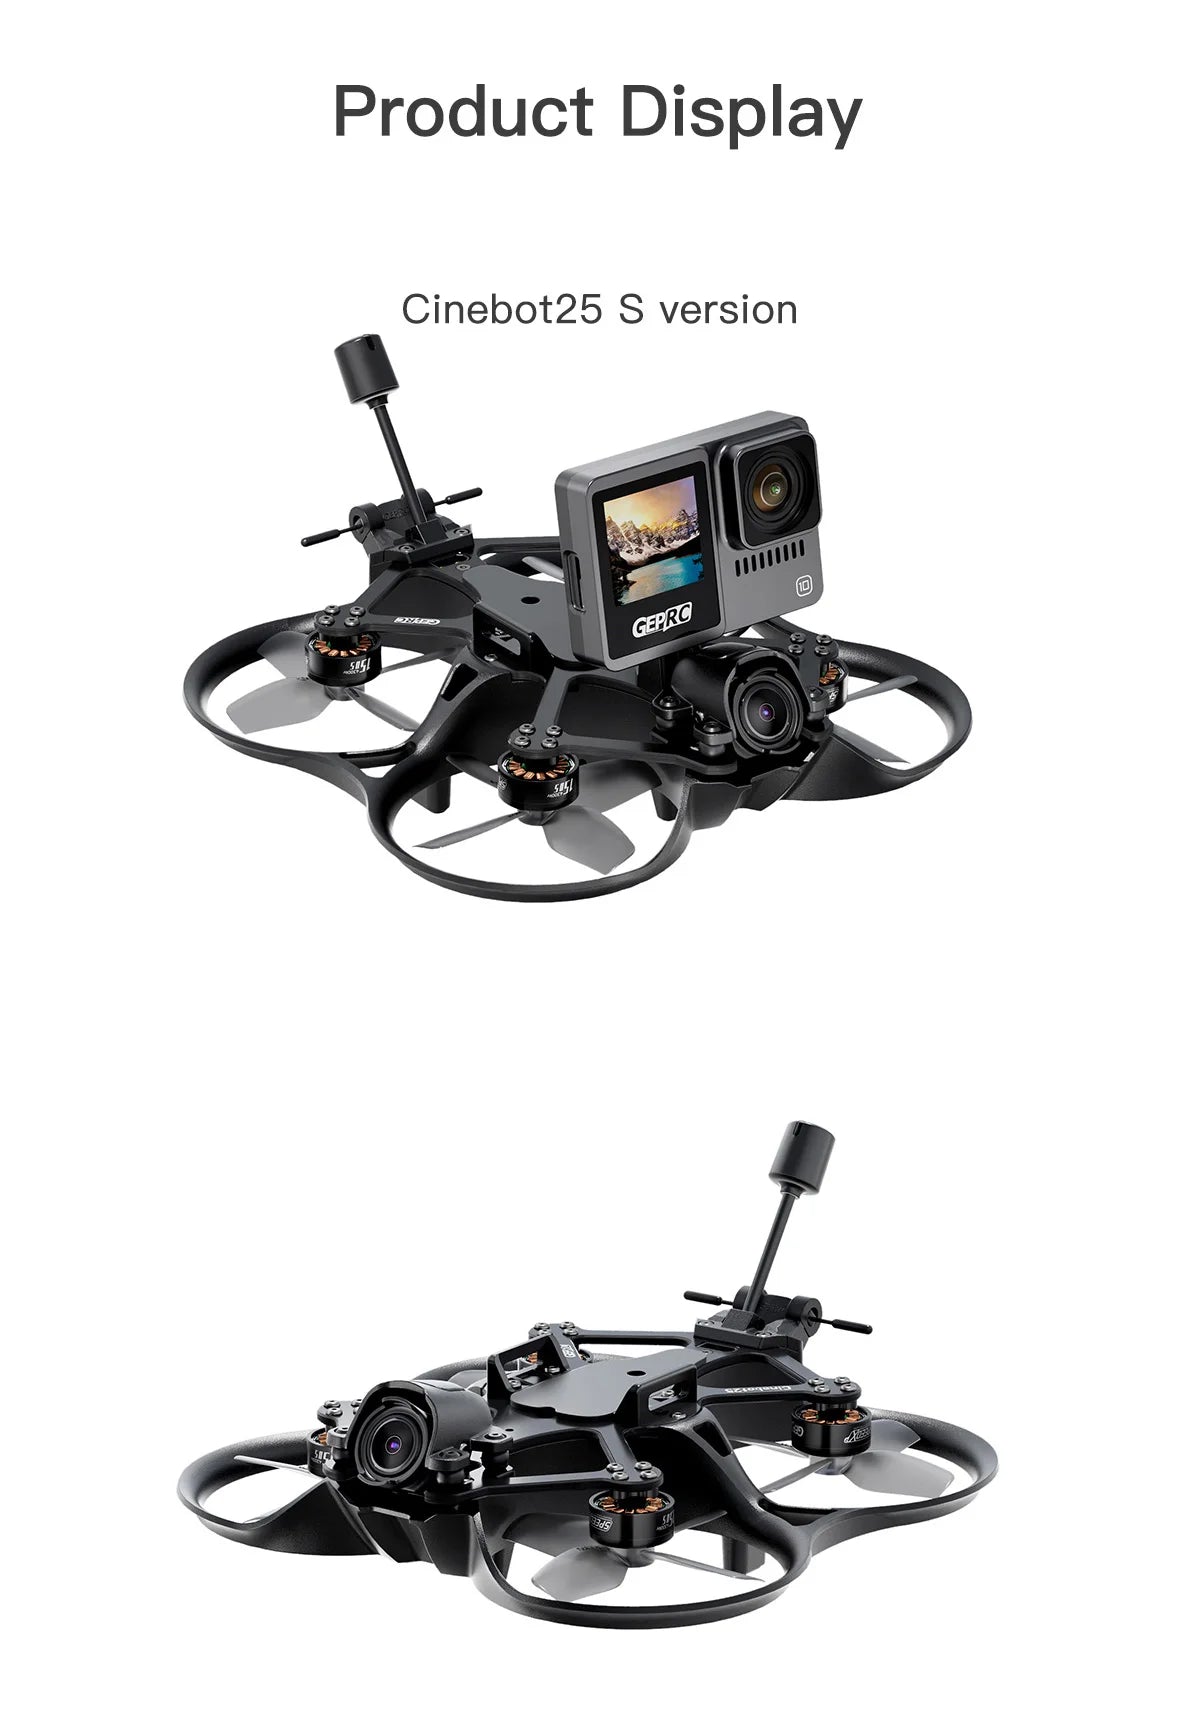 GEPRC Cinebot25 WTFPV FPV Drone, GEPRO Cinebot25 S version S451 